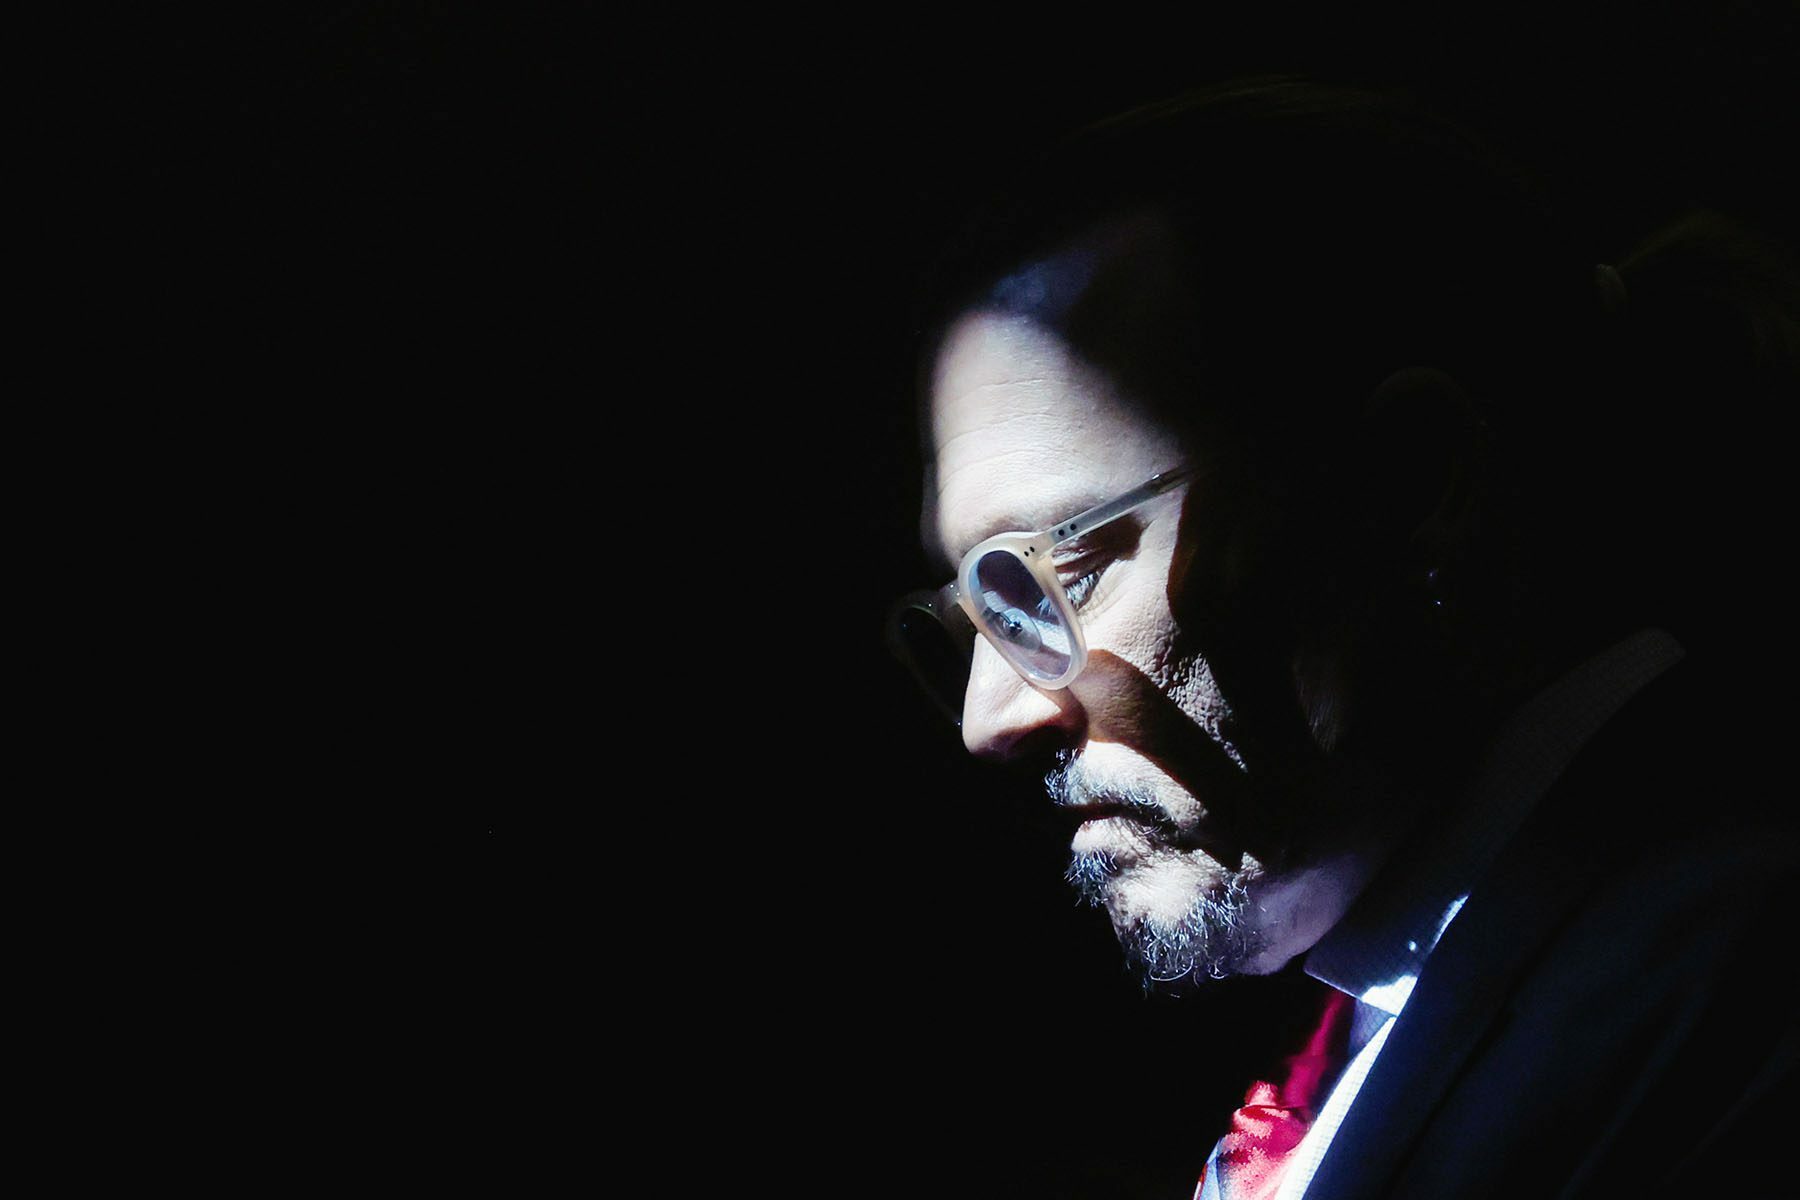 Johnny Depp's face is illuminated by sunlight while the rest of the image is dark. He is looking down and wears a solemn expression on his face.